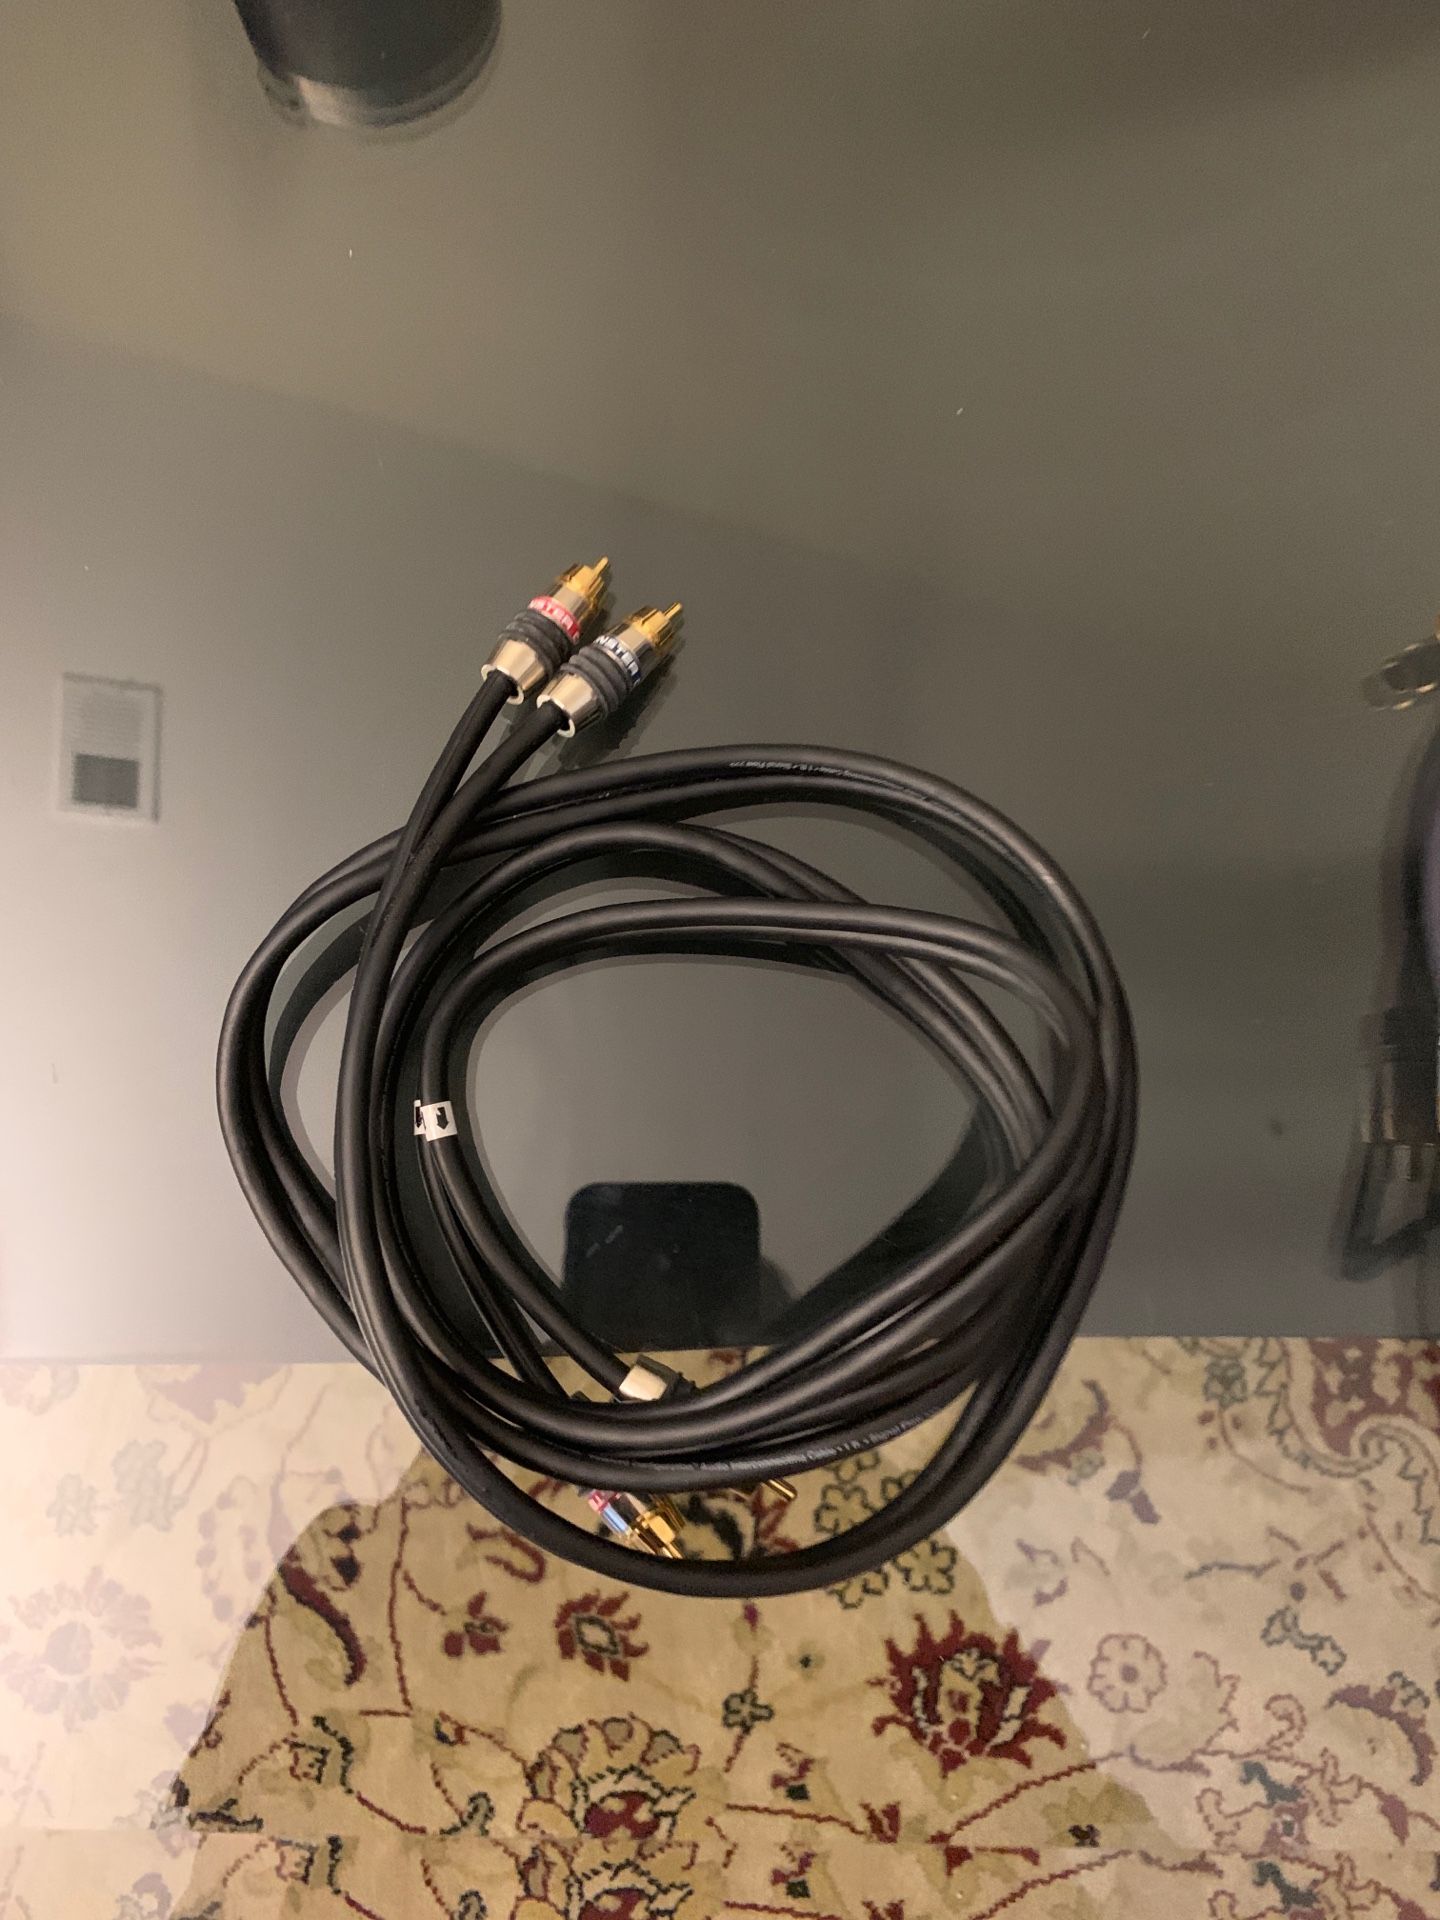 Monster Audio and video cables